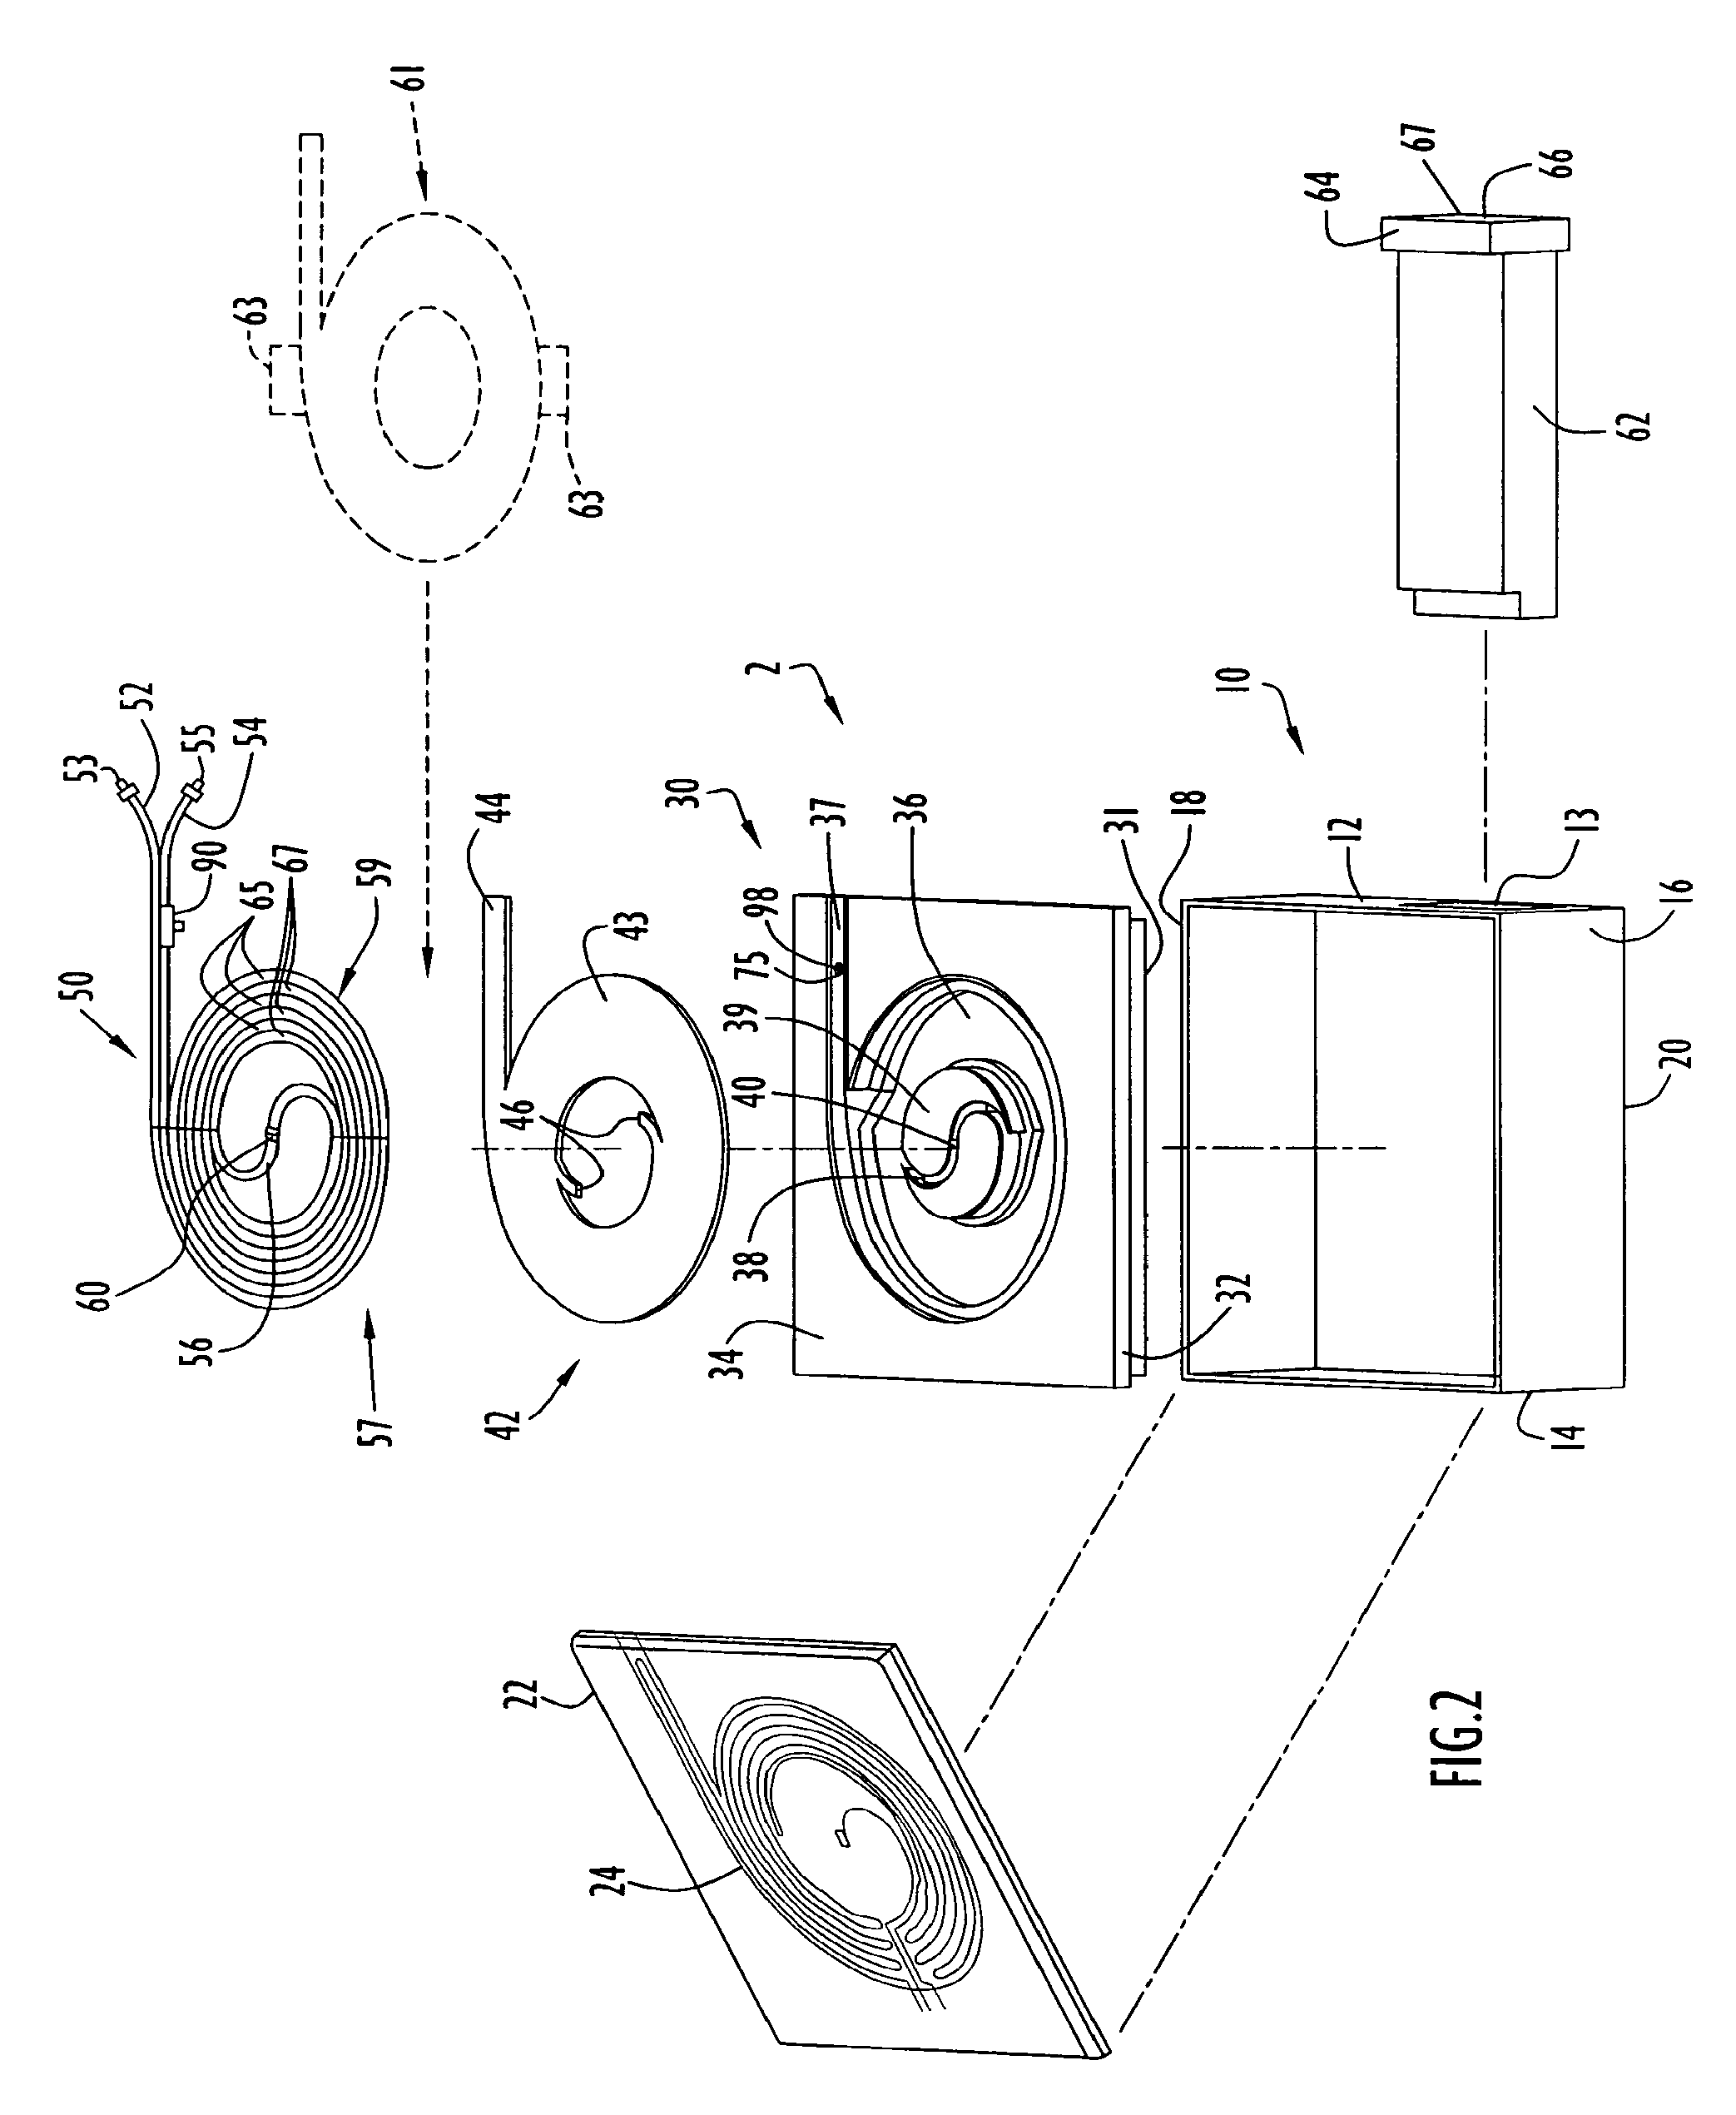 Method and Apparatus for Heating Solutions Within Intravenous Lines to Desired Temperatures During Infusion